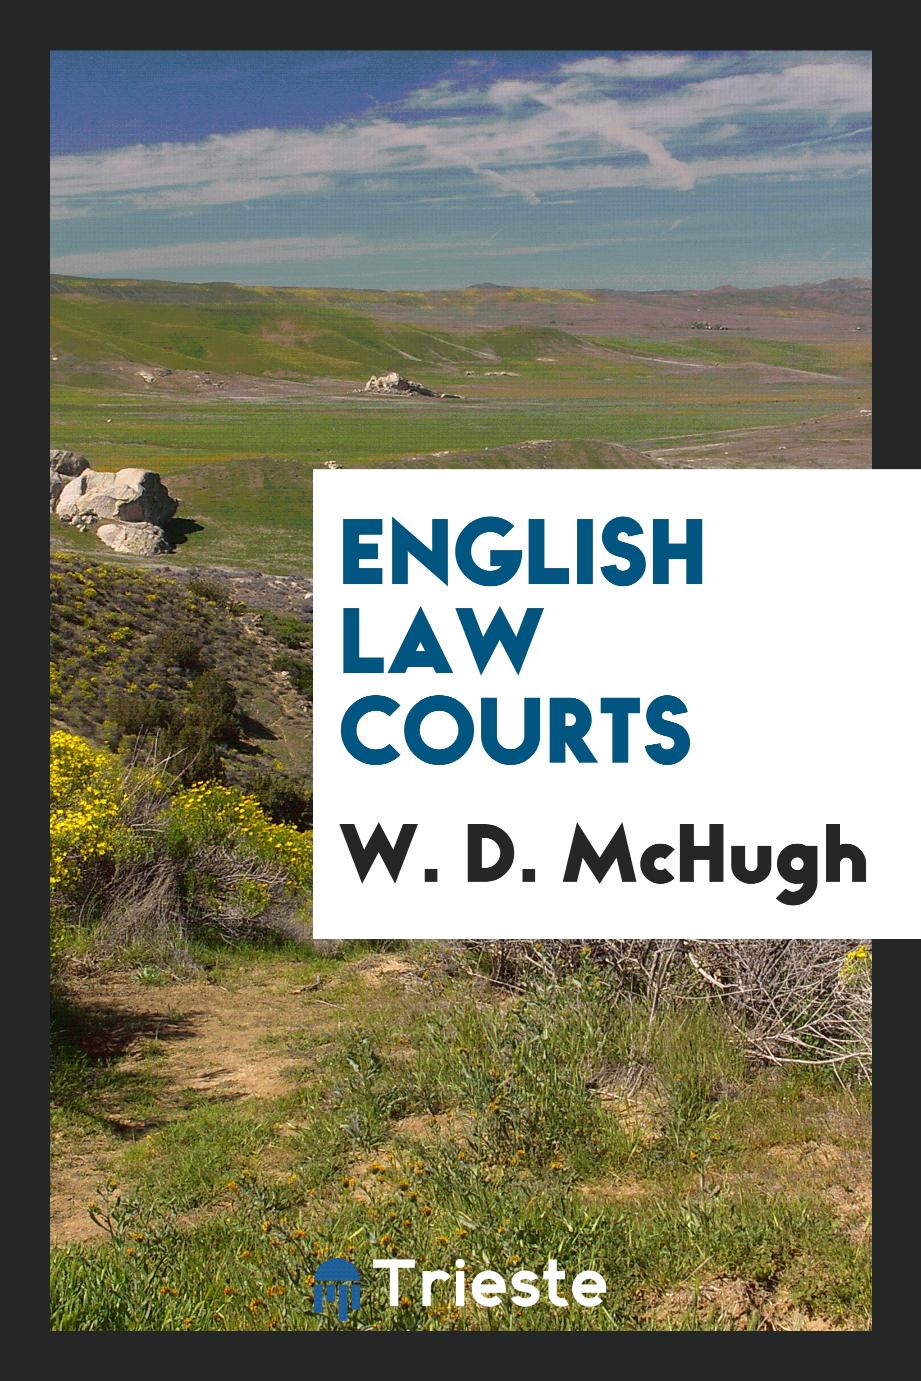 English law courts